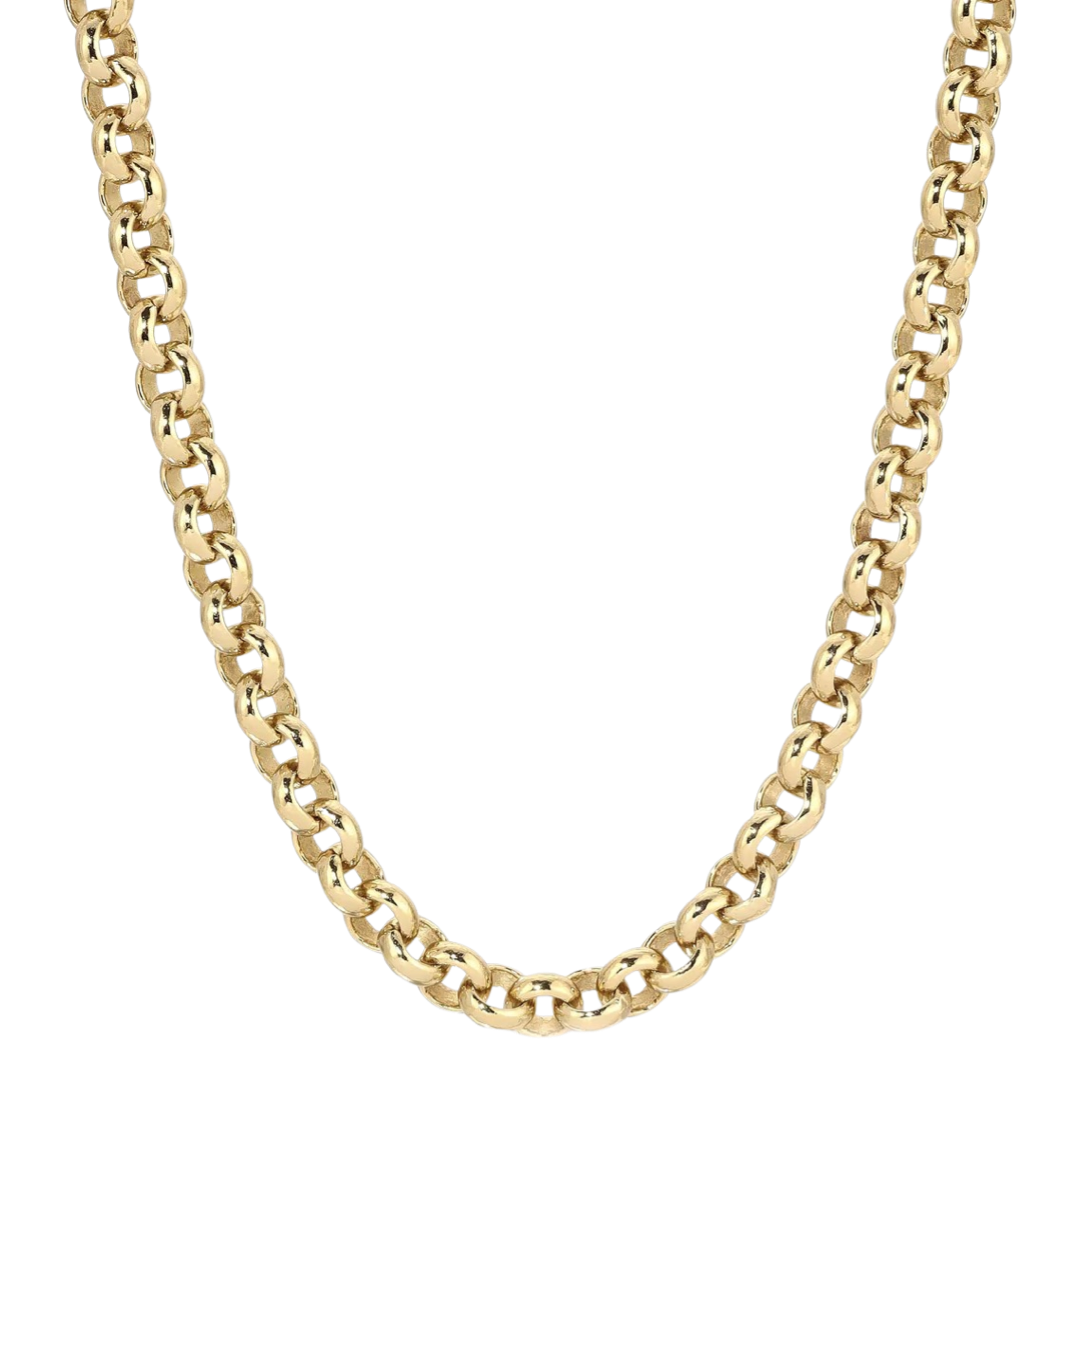 Micro Royal Rolo Chain in Gold 22”